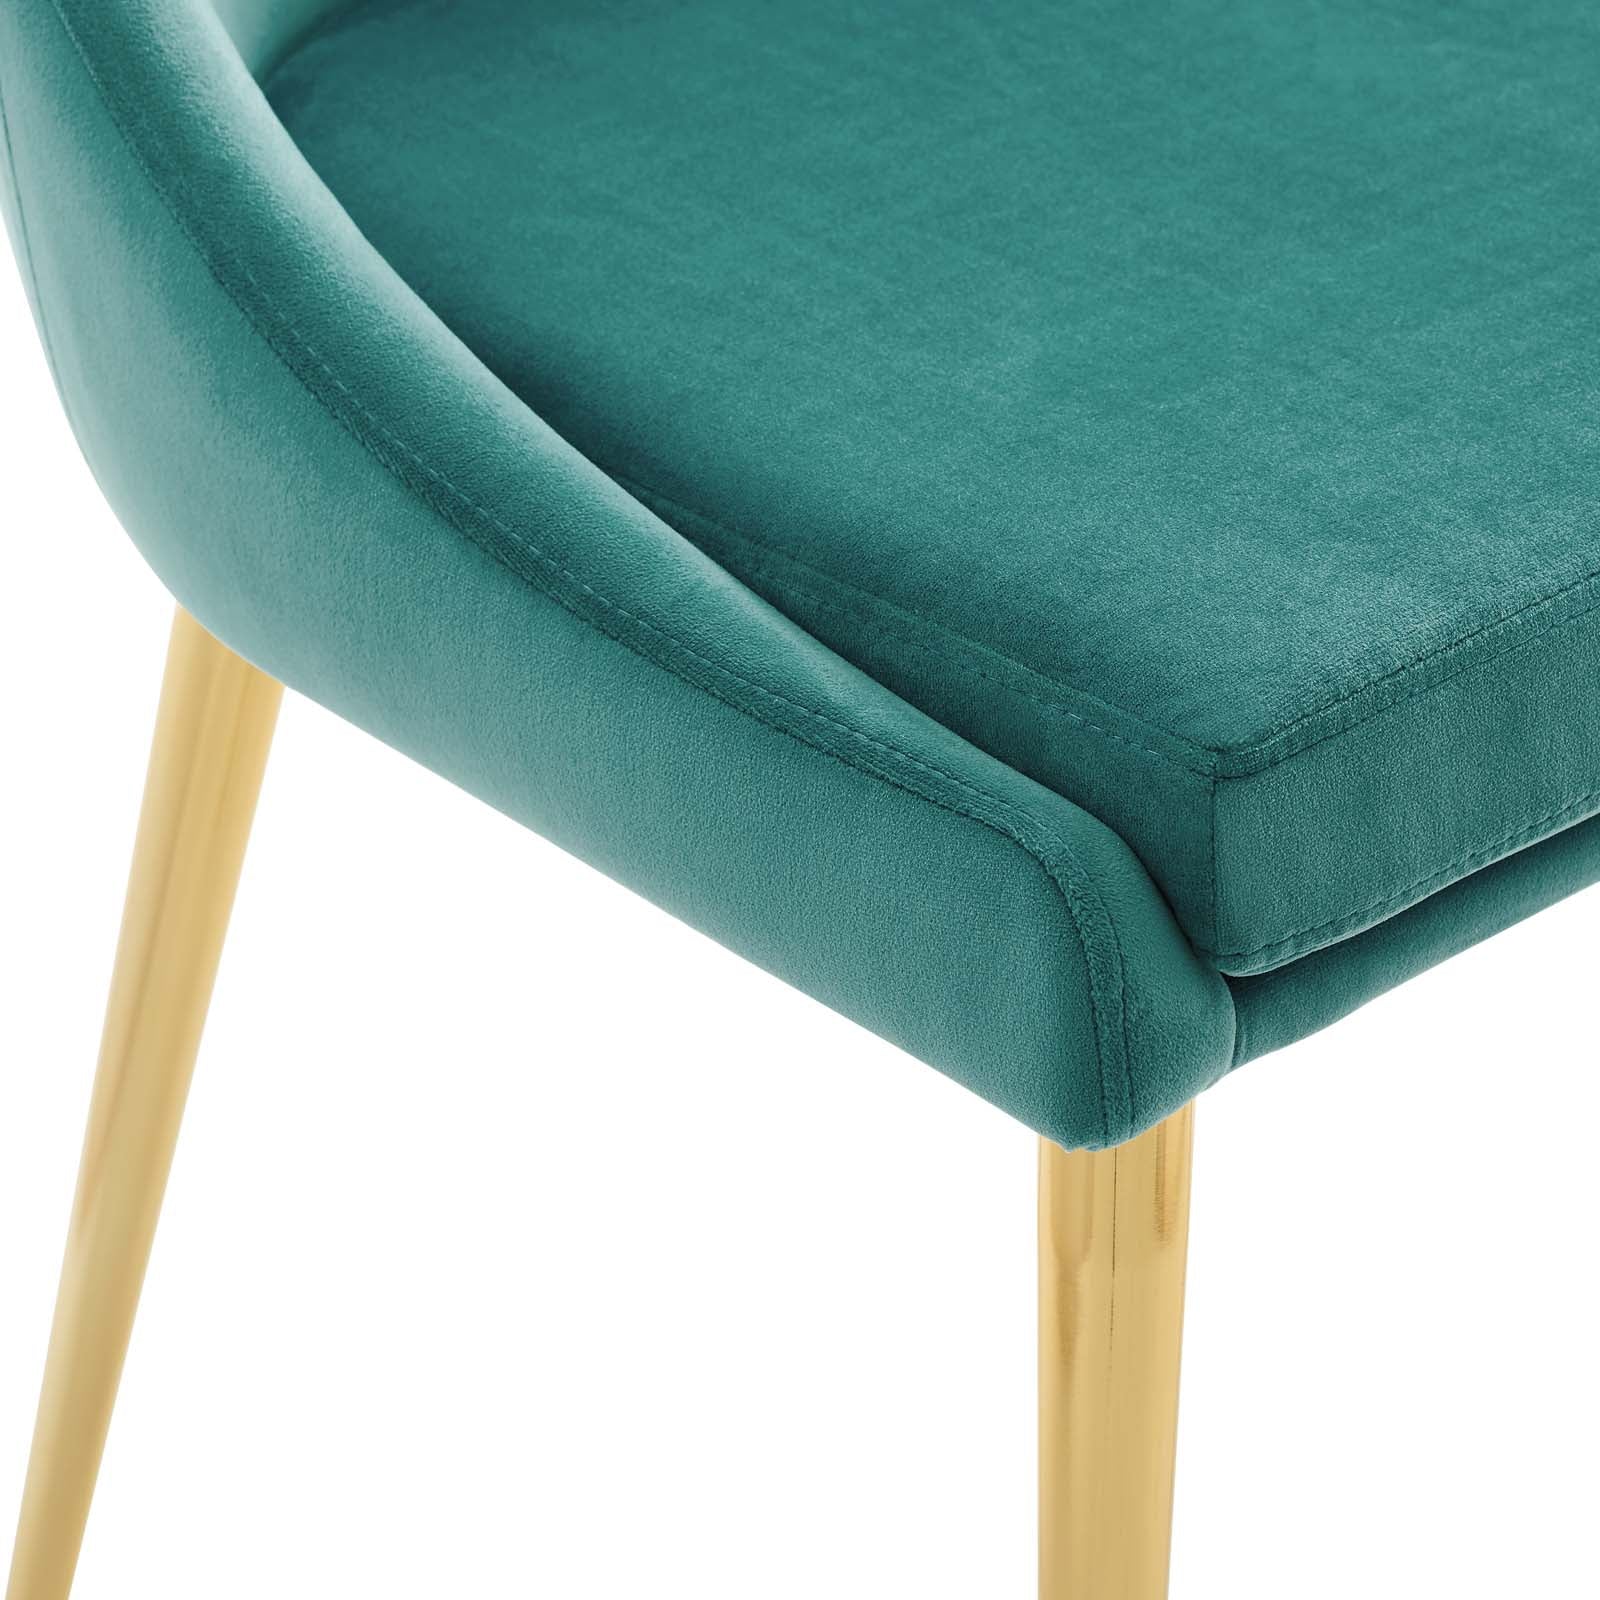 Modway Dining Chairs - Viscount Modern Accent Performance Velvet Dining Chair Teal